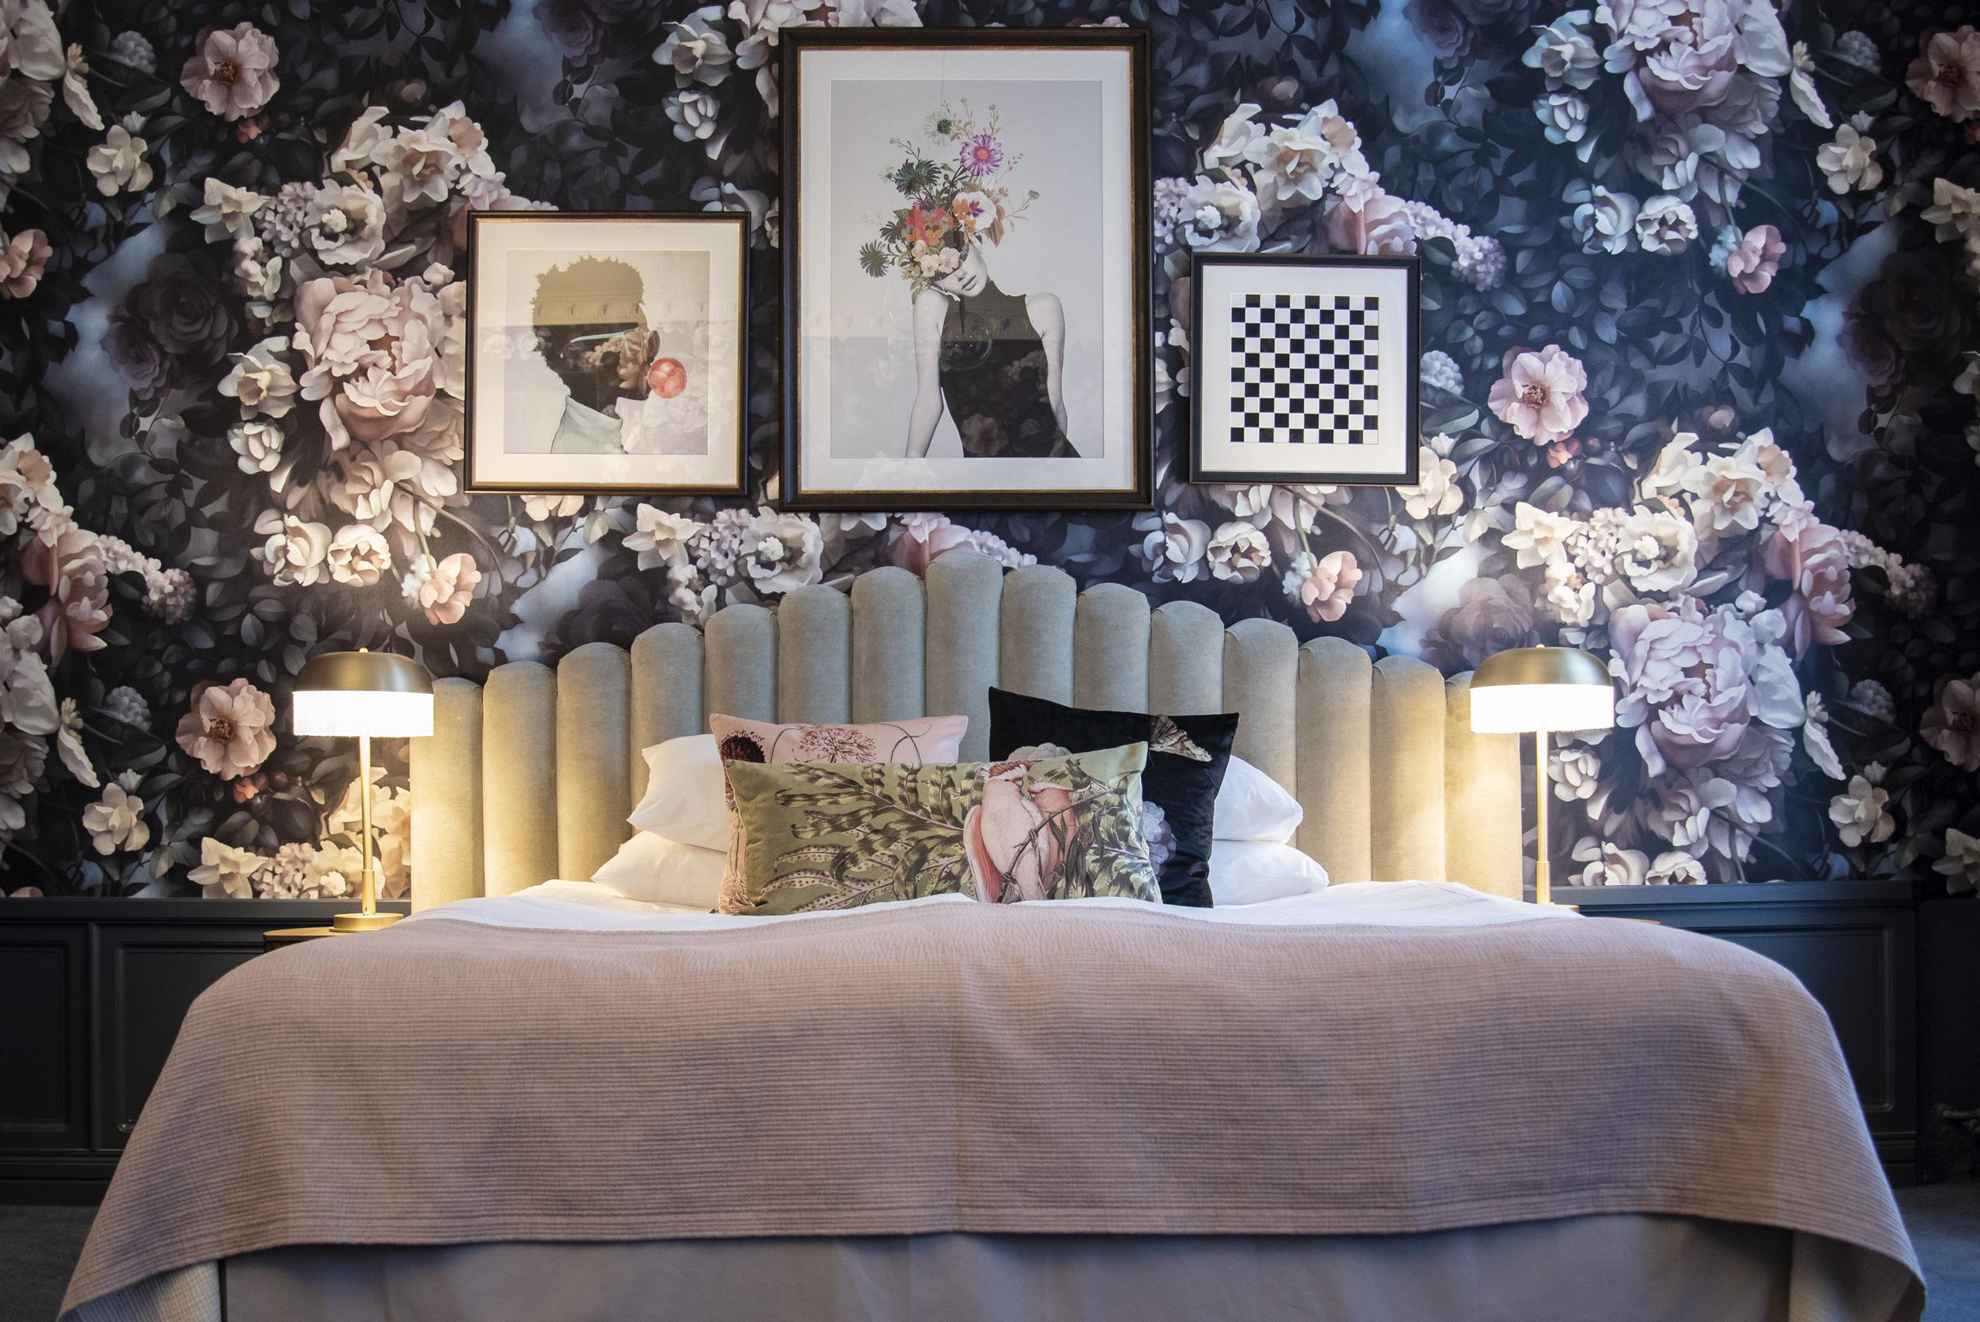 Inside a room at a hotel. A bed in front of a wall with a wallpaper with large pink and white roses. There are three pictures on the wall and three cushions in different pattern on the bed.